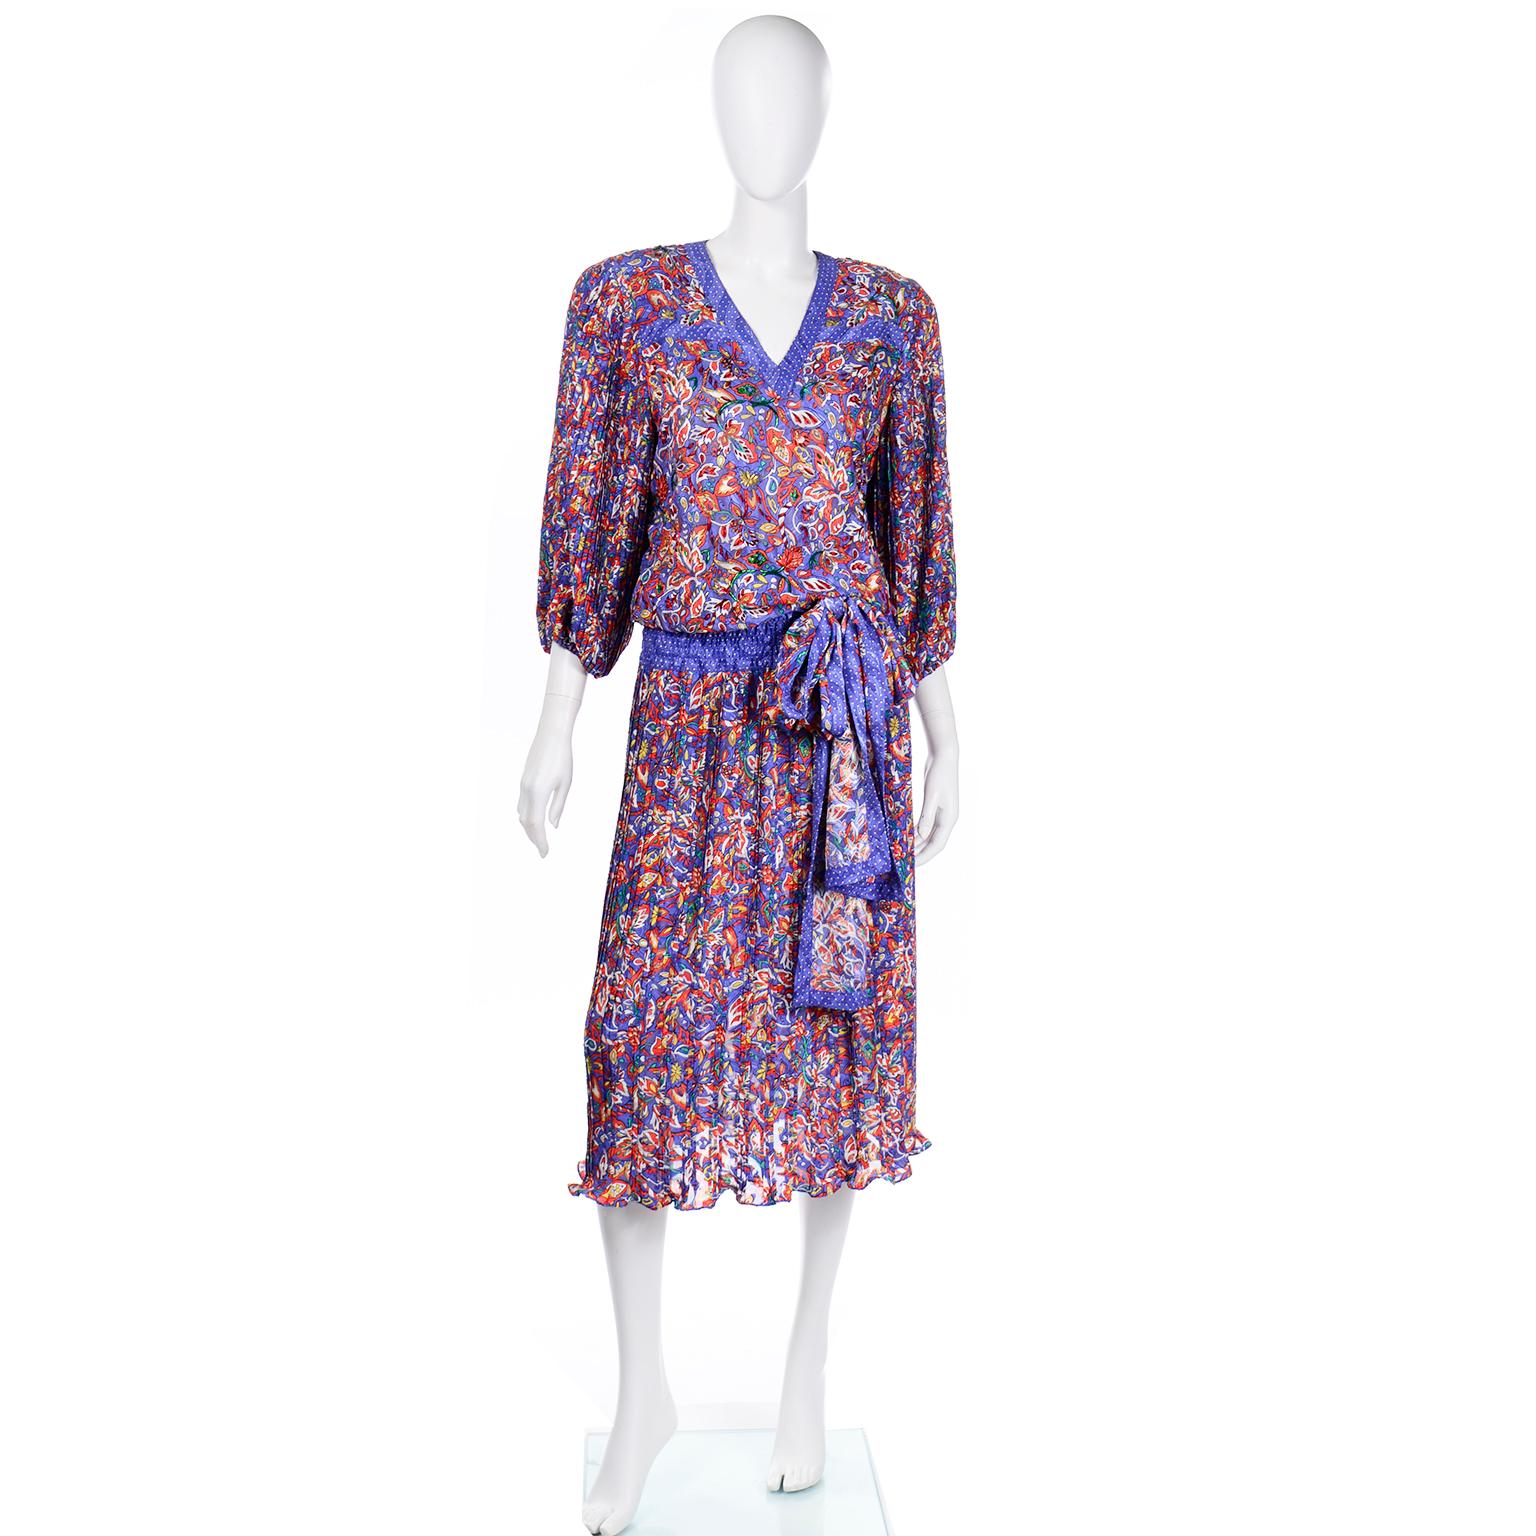 This is a 1980's vintage Diane Freis colorful, bold dress with an elasticized waistband and mirco-pleated balloon sleeves. We love vintage Diane Freis prints and this one is a mixed pattern jacquard print in shades of blue, orange, white, yellow,